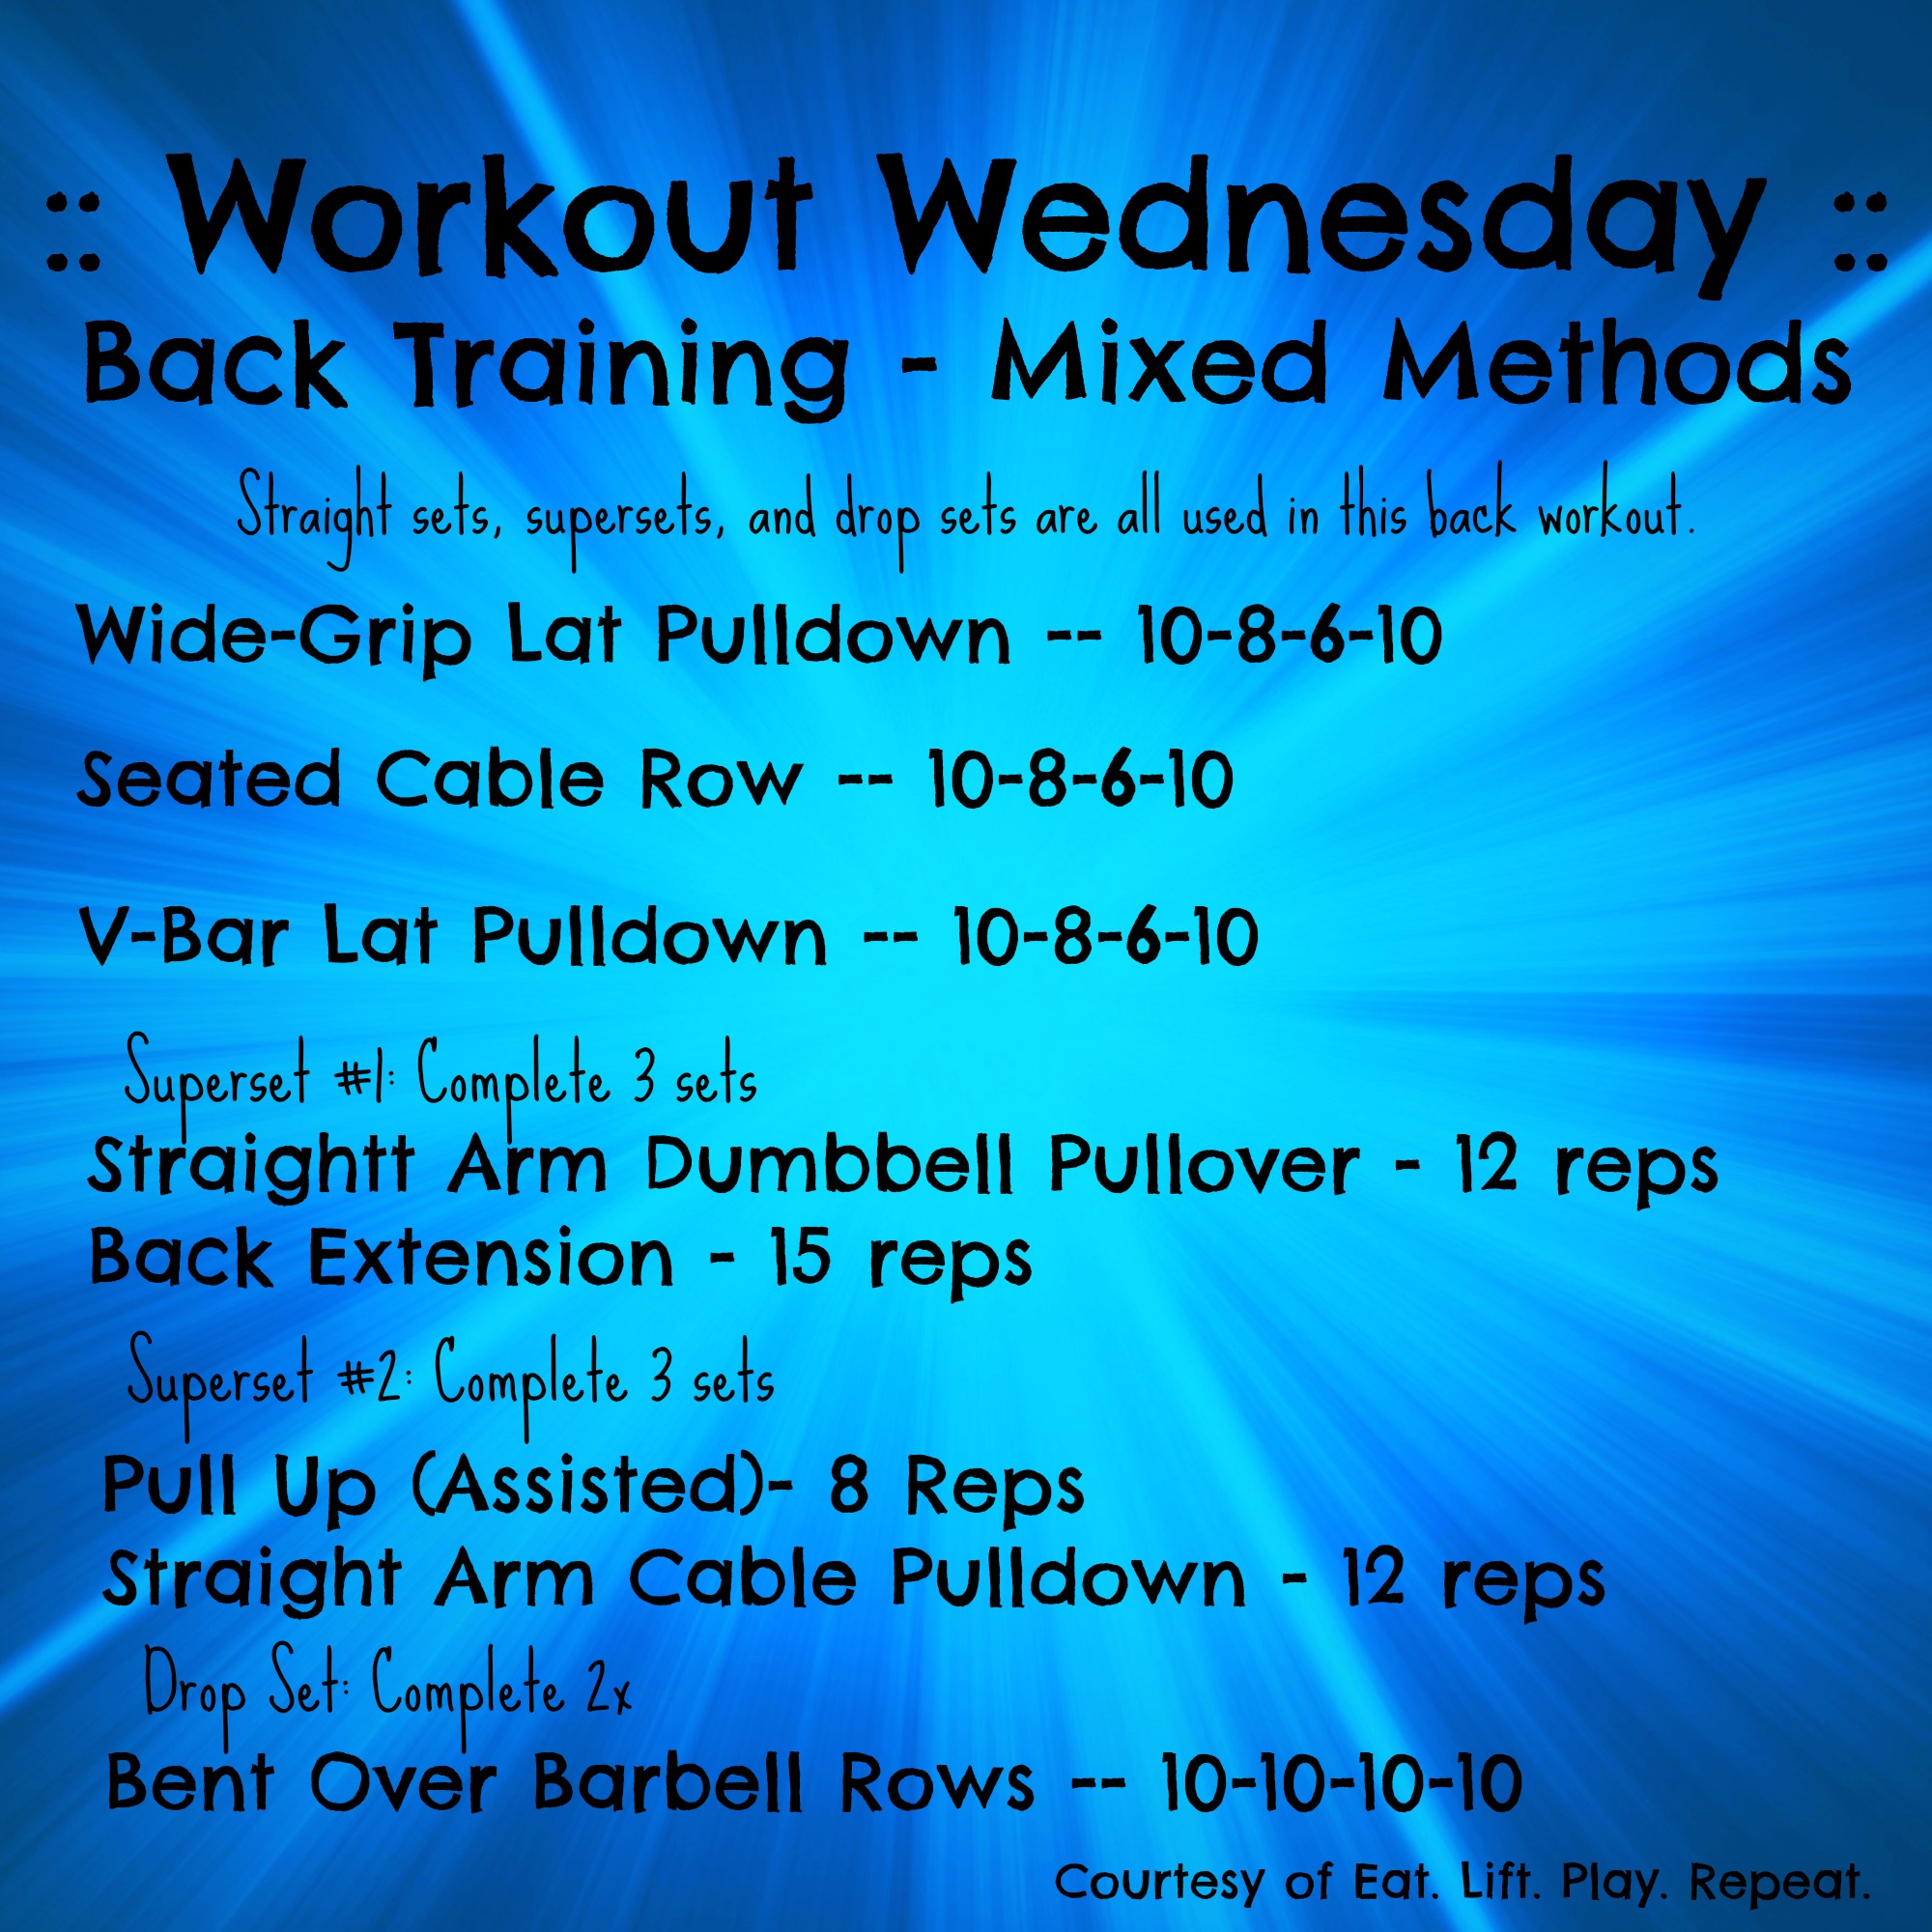 Back Training - Mixed Methods - Eat. Lift. Play. Repeat.